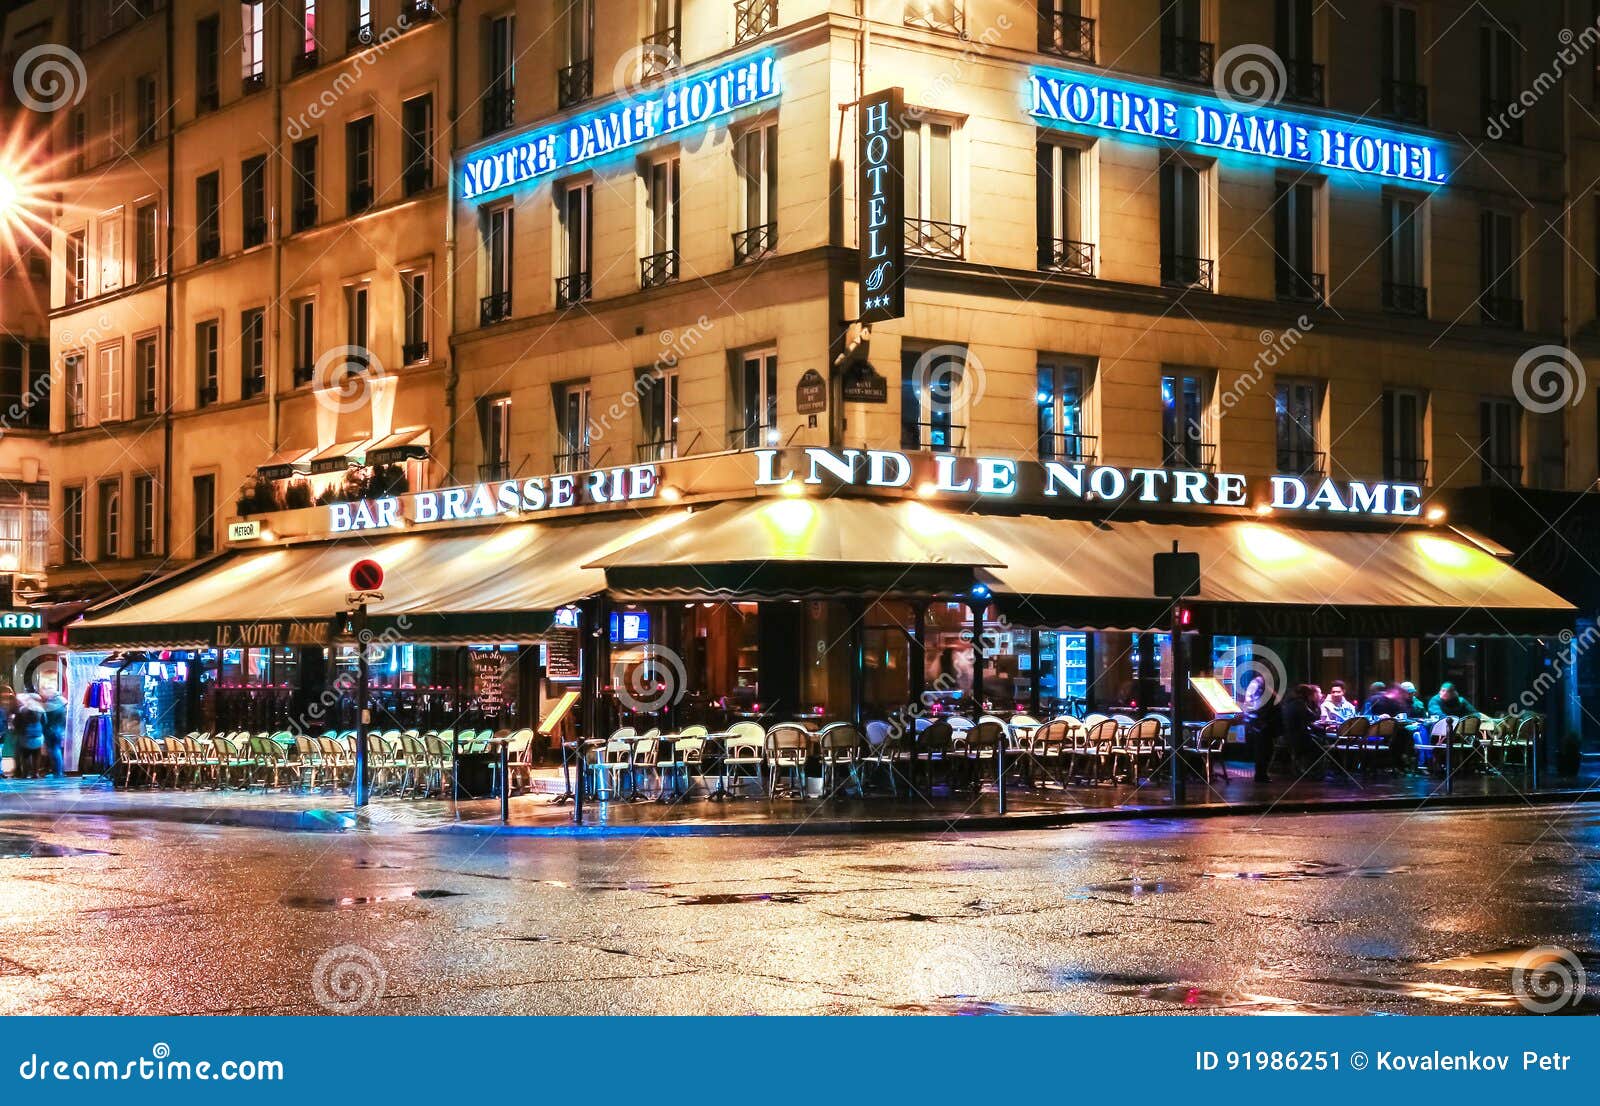 The Traditional Parisian Cafe Le Notre Dame at Night , France ...